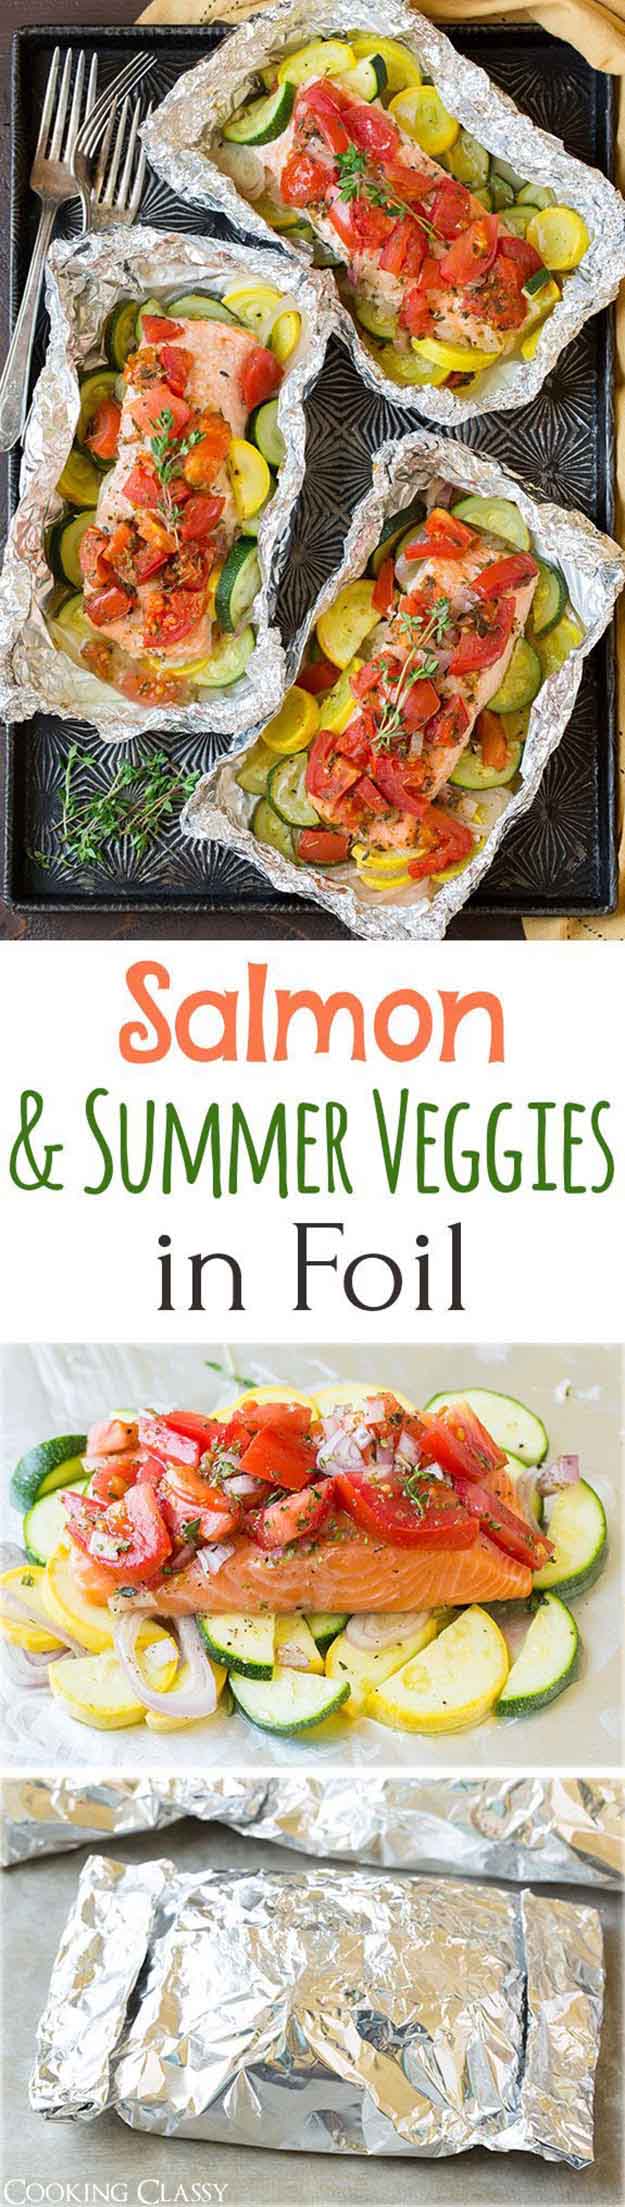 Paleo Fish Dinner Grilling Recipes | Salmon & Vegetable Foil Packets | Grilled Salmon & Veggies in Foil | DIY Projects & Crafts by DIY JOY at http://diyjoy.com/grilling-recipes-diy-bbq-ideas